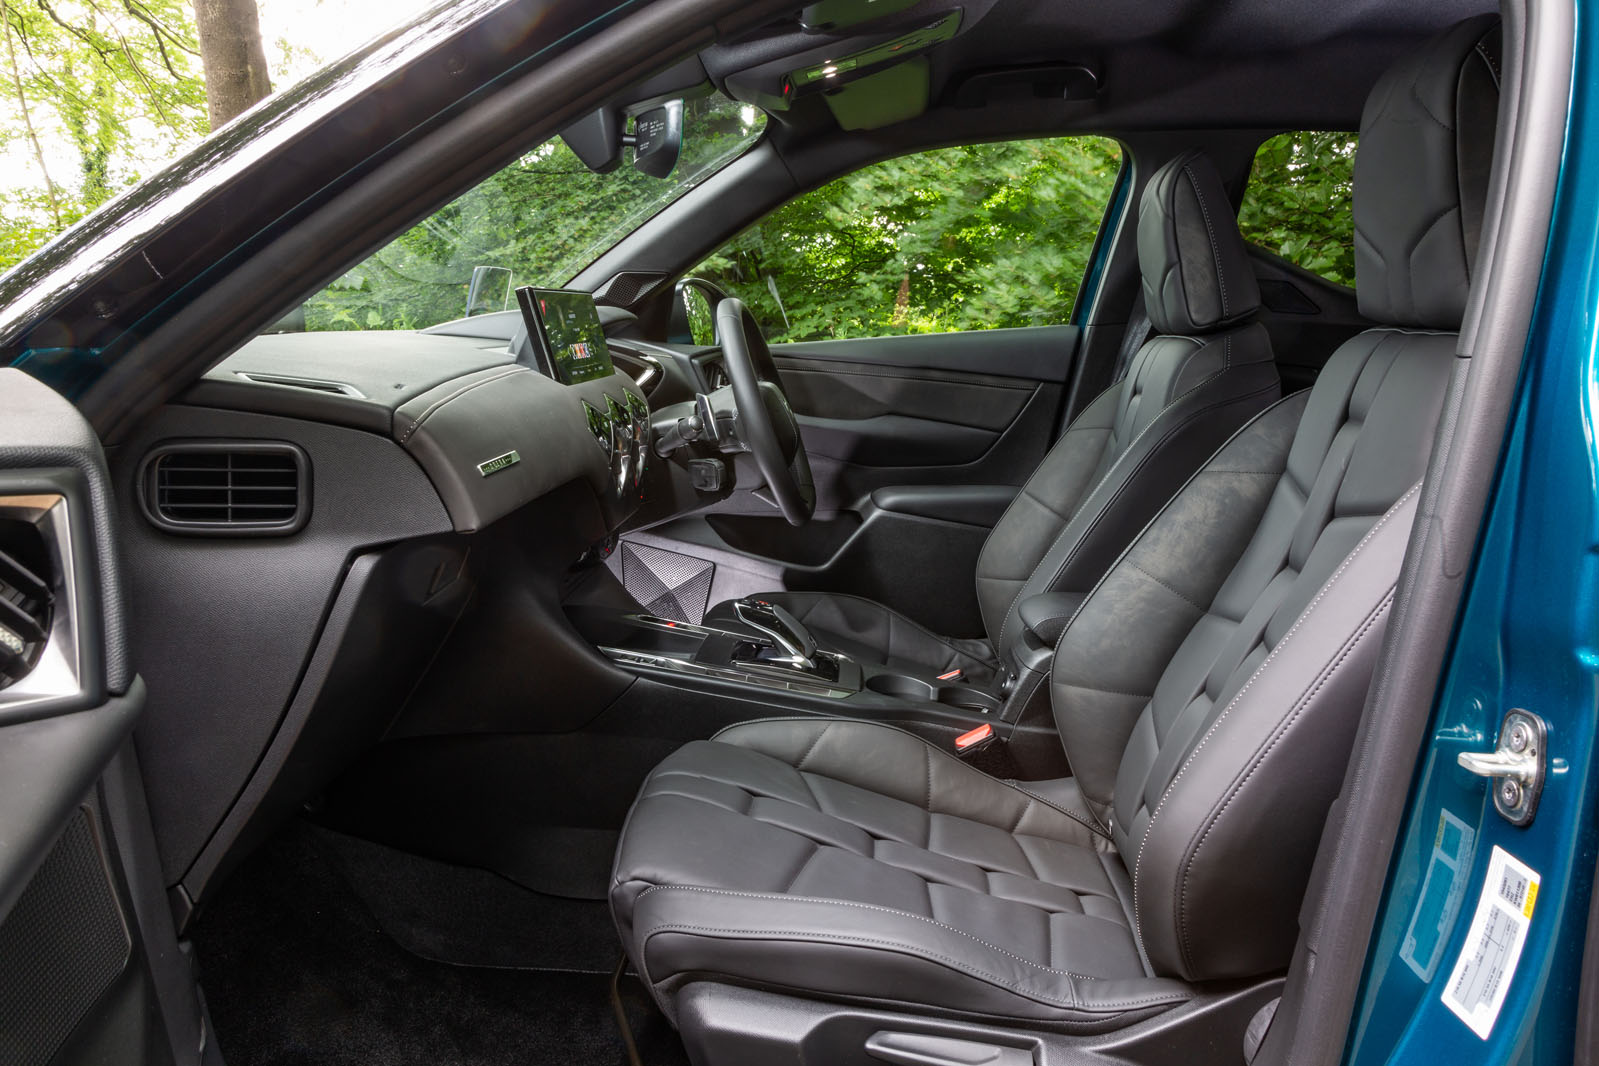 DS 3 Crossback 2019 road test review - cabin